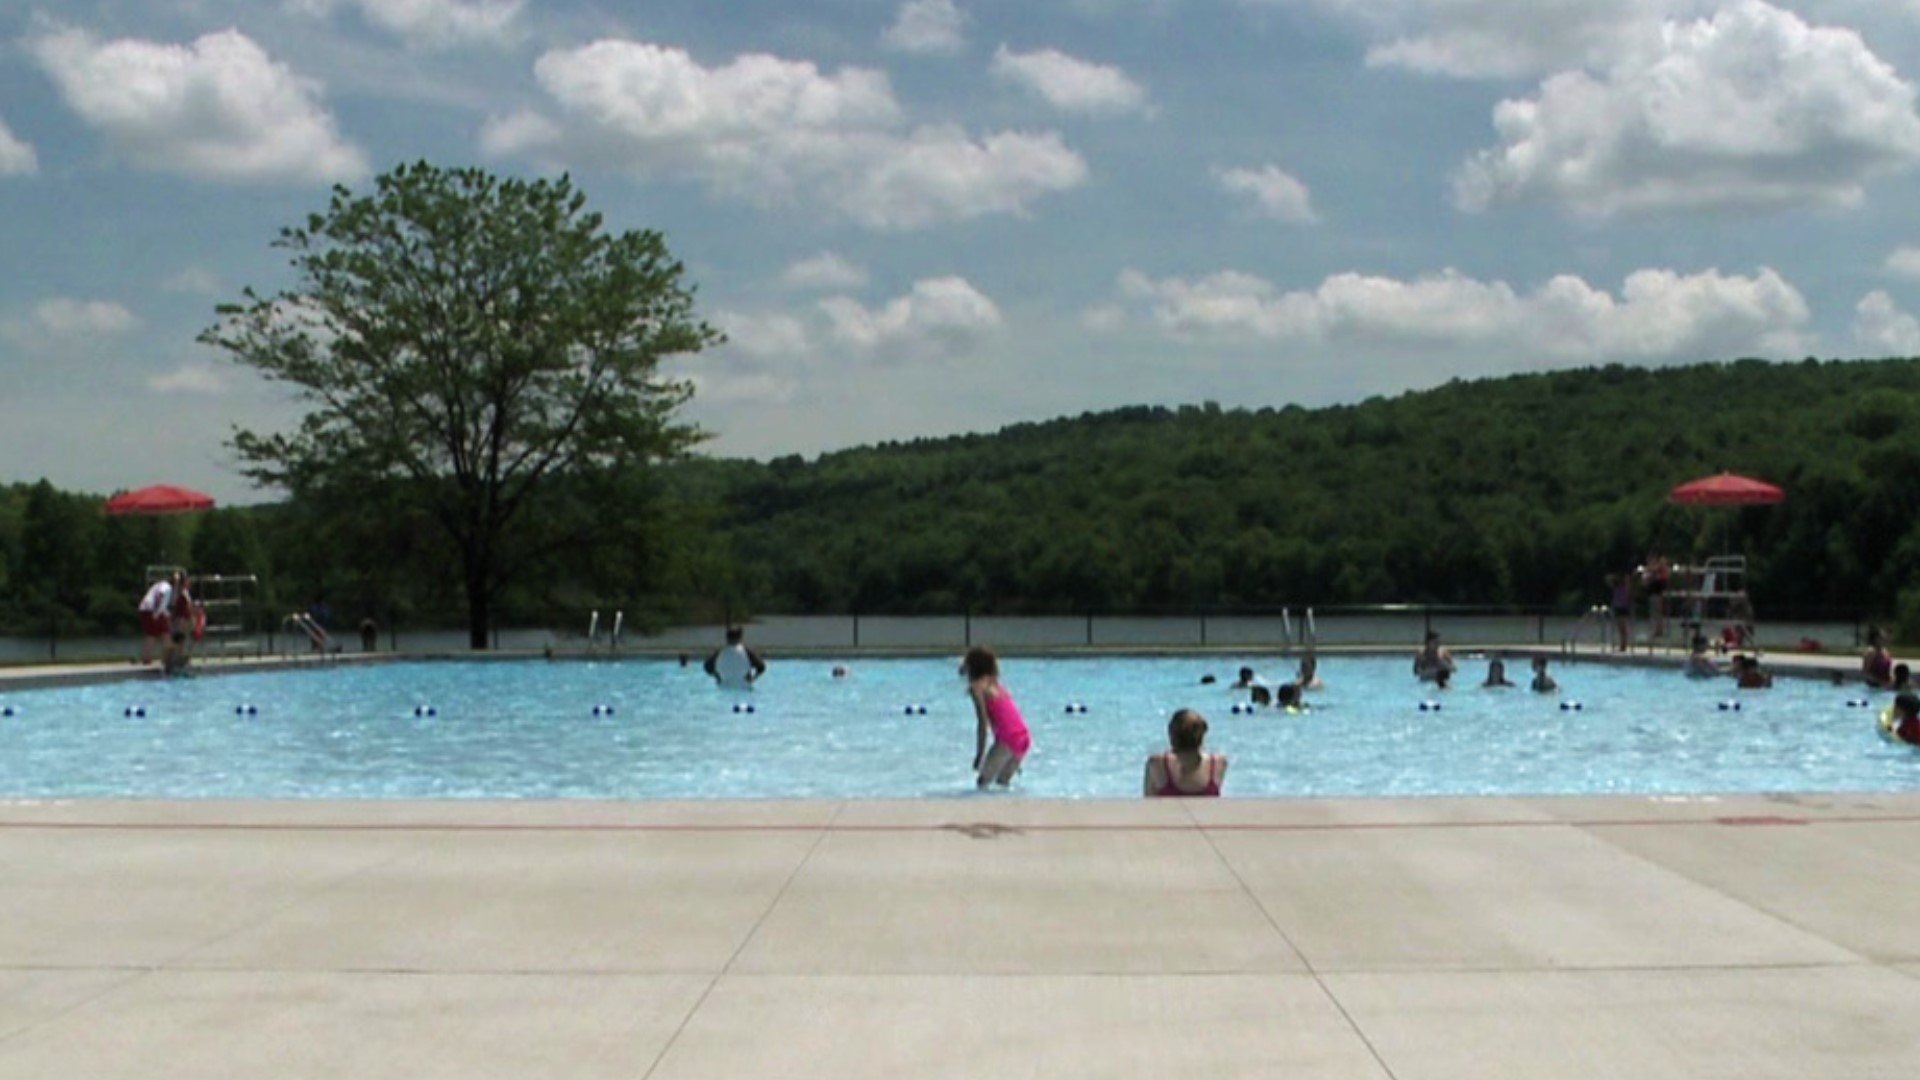 Because of staffing shortages, the pool at the state park in Lackawanna County will be closed beginning Tuesday.